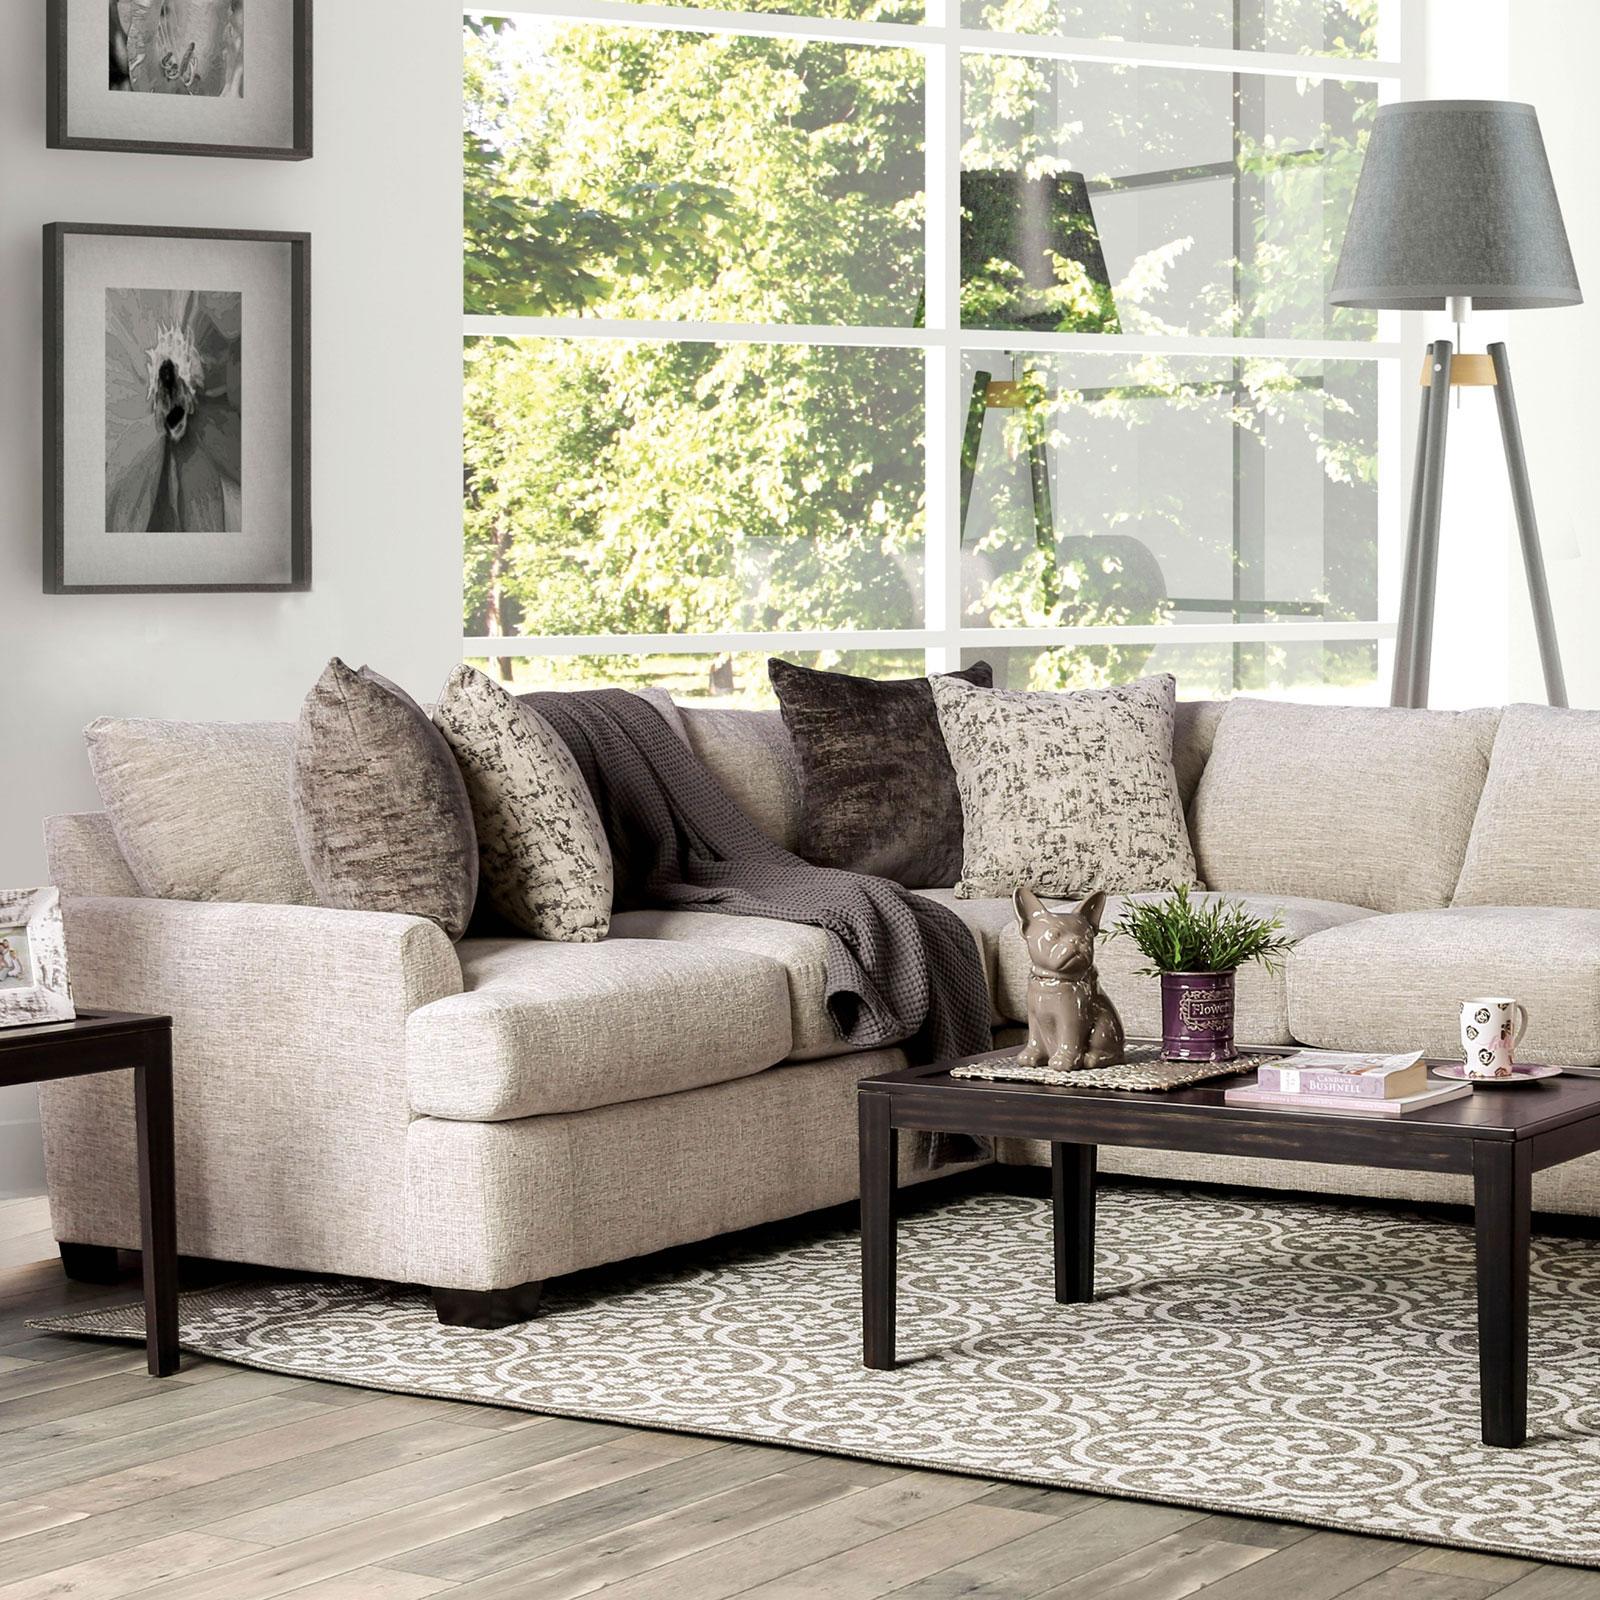 Transitional Sectional Sofa ALISA SM3079 SM3079 in Ivory Chenille